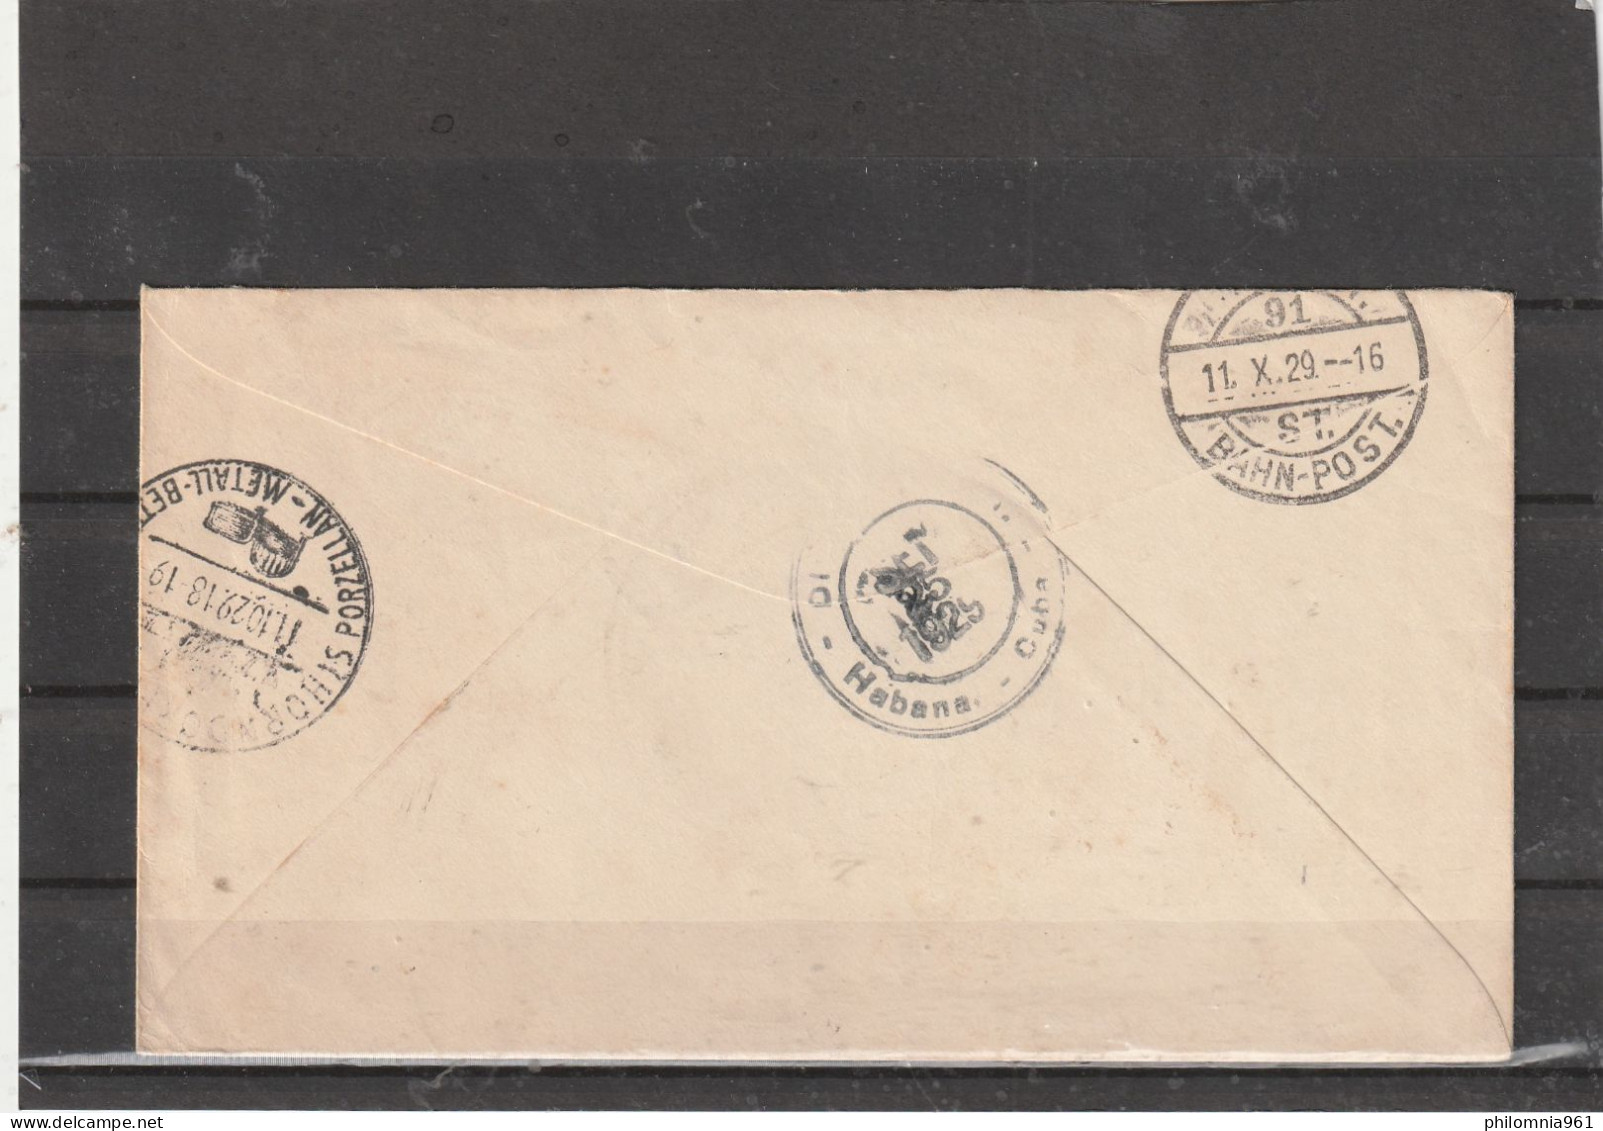 Cuba REGISTERED COVER To Germany 1929 - Lettres & Documents